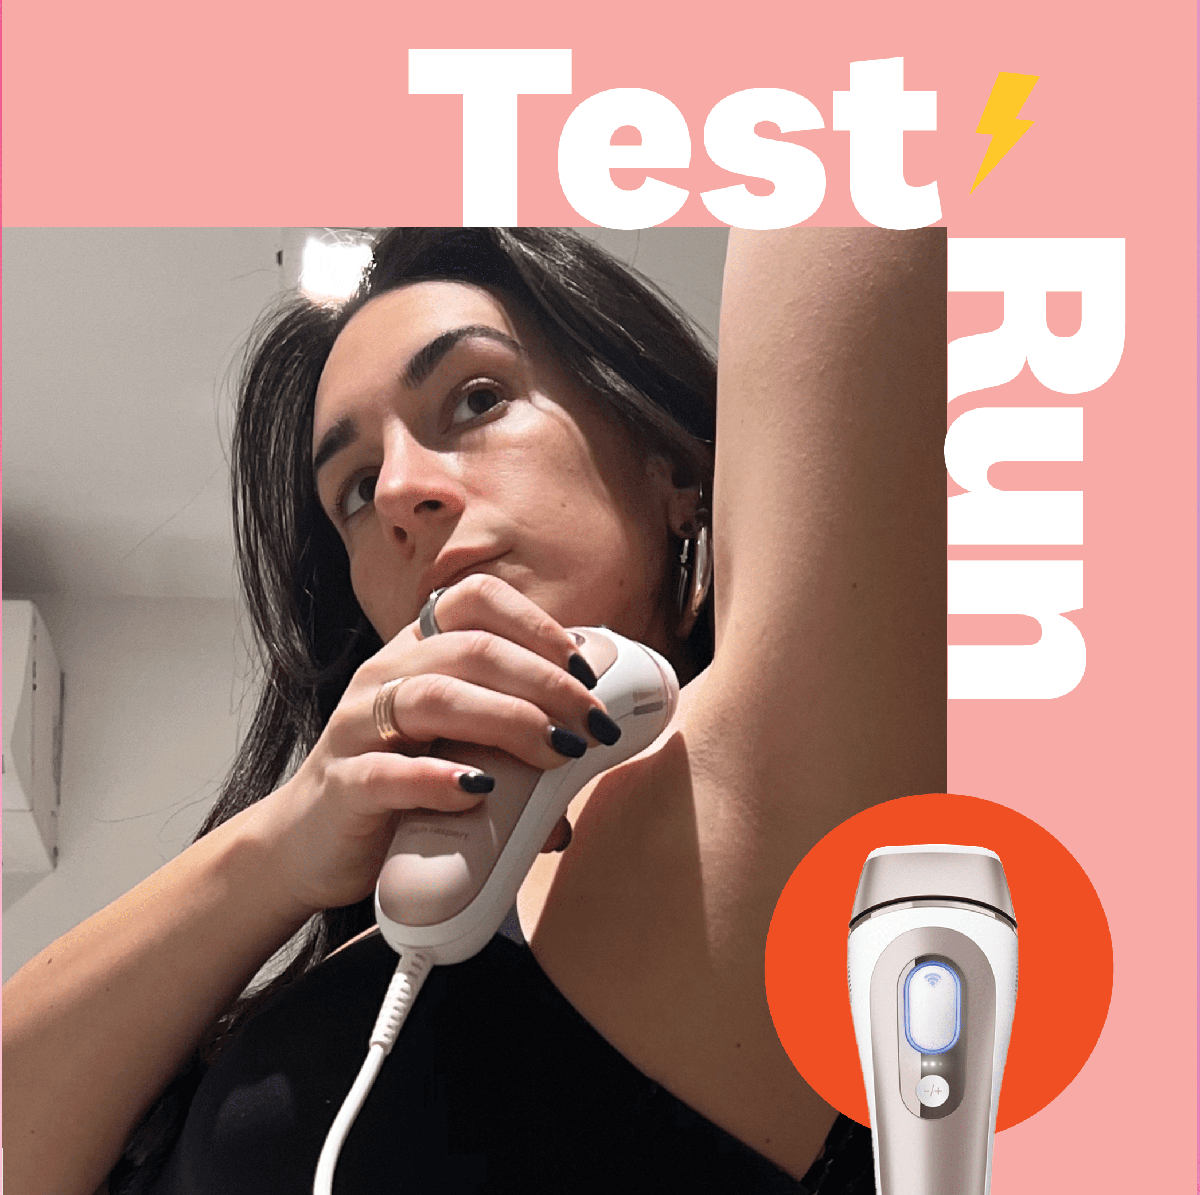 Laser or IPL hair removal: Which is best?, Braun